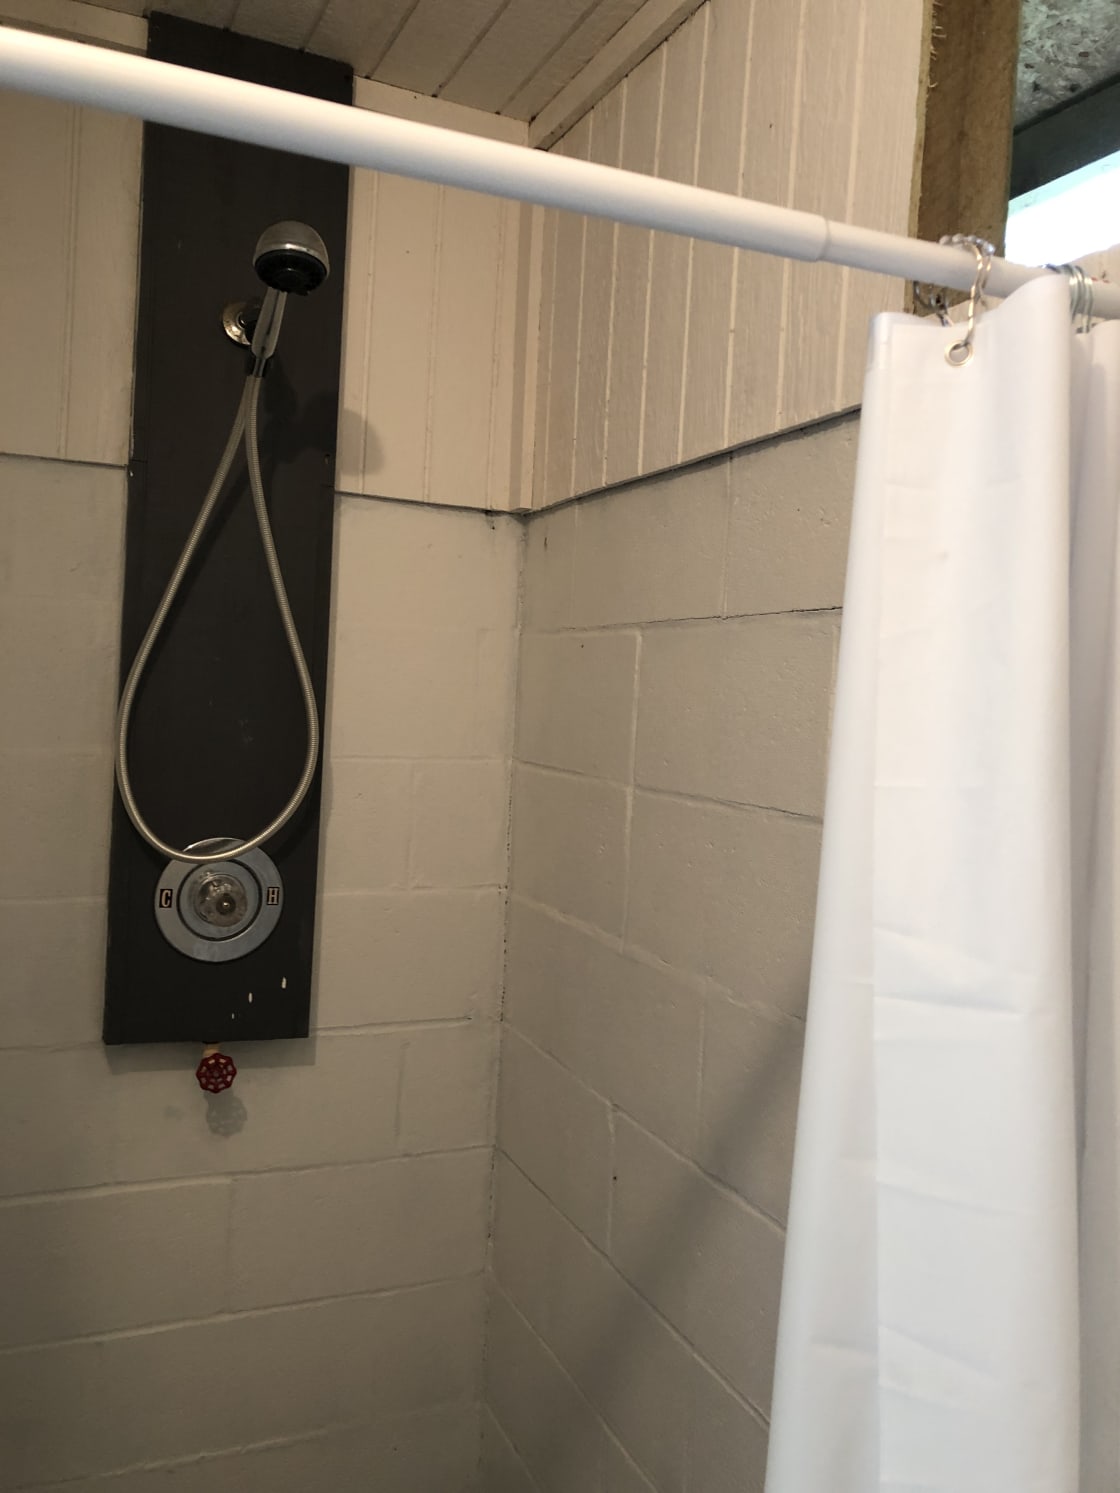 Shower includes hot water